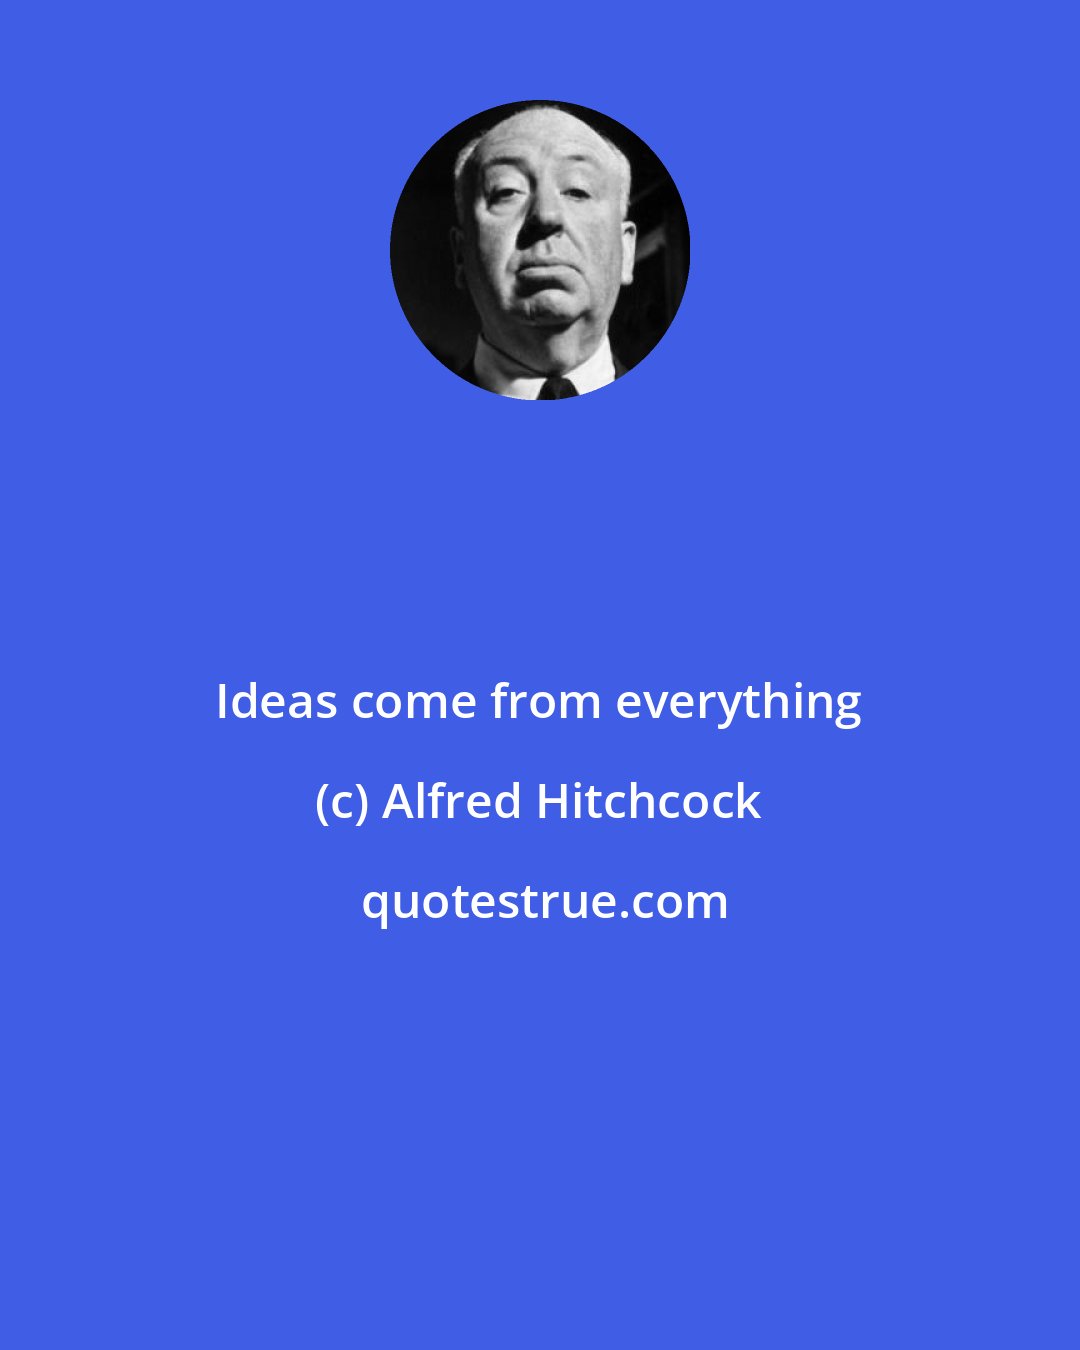 Alfred Hitchcock: Ideas come from everything